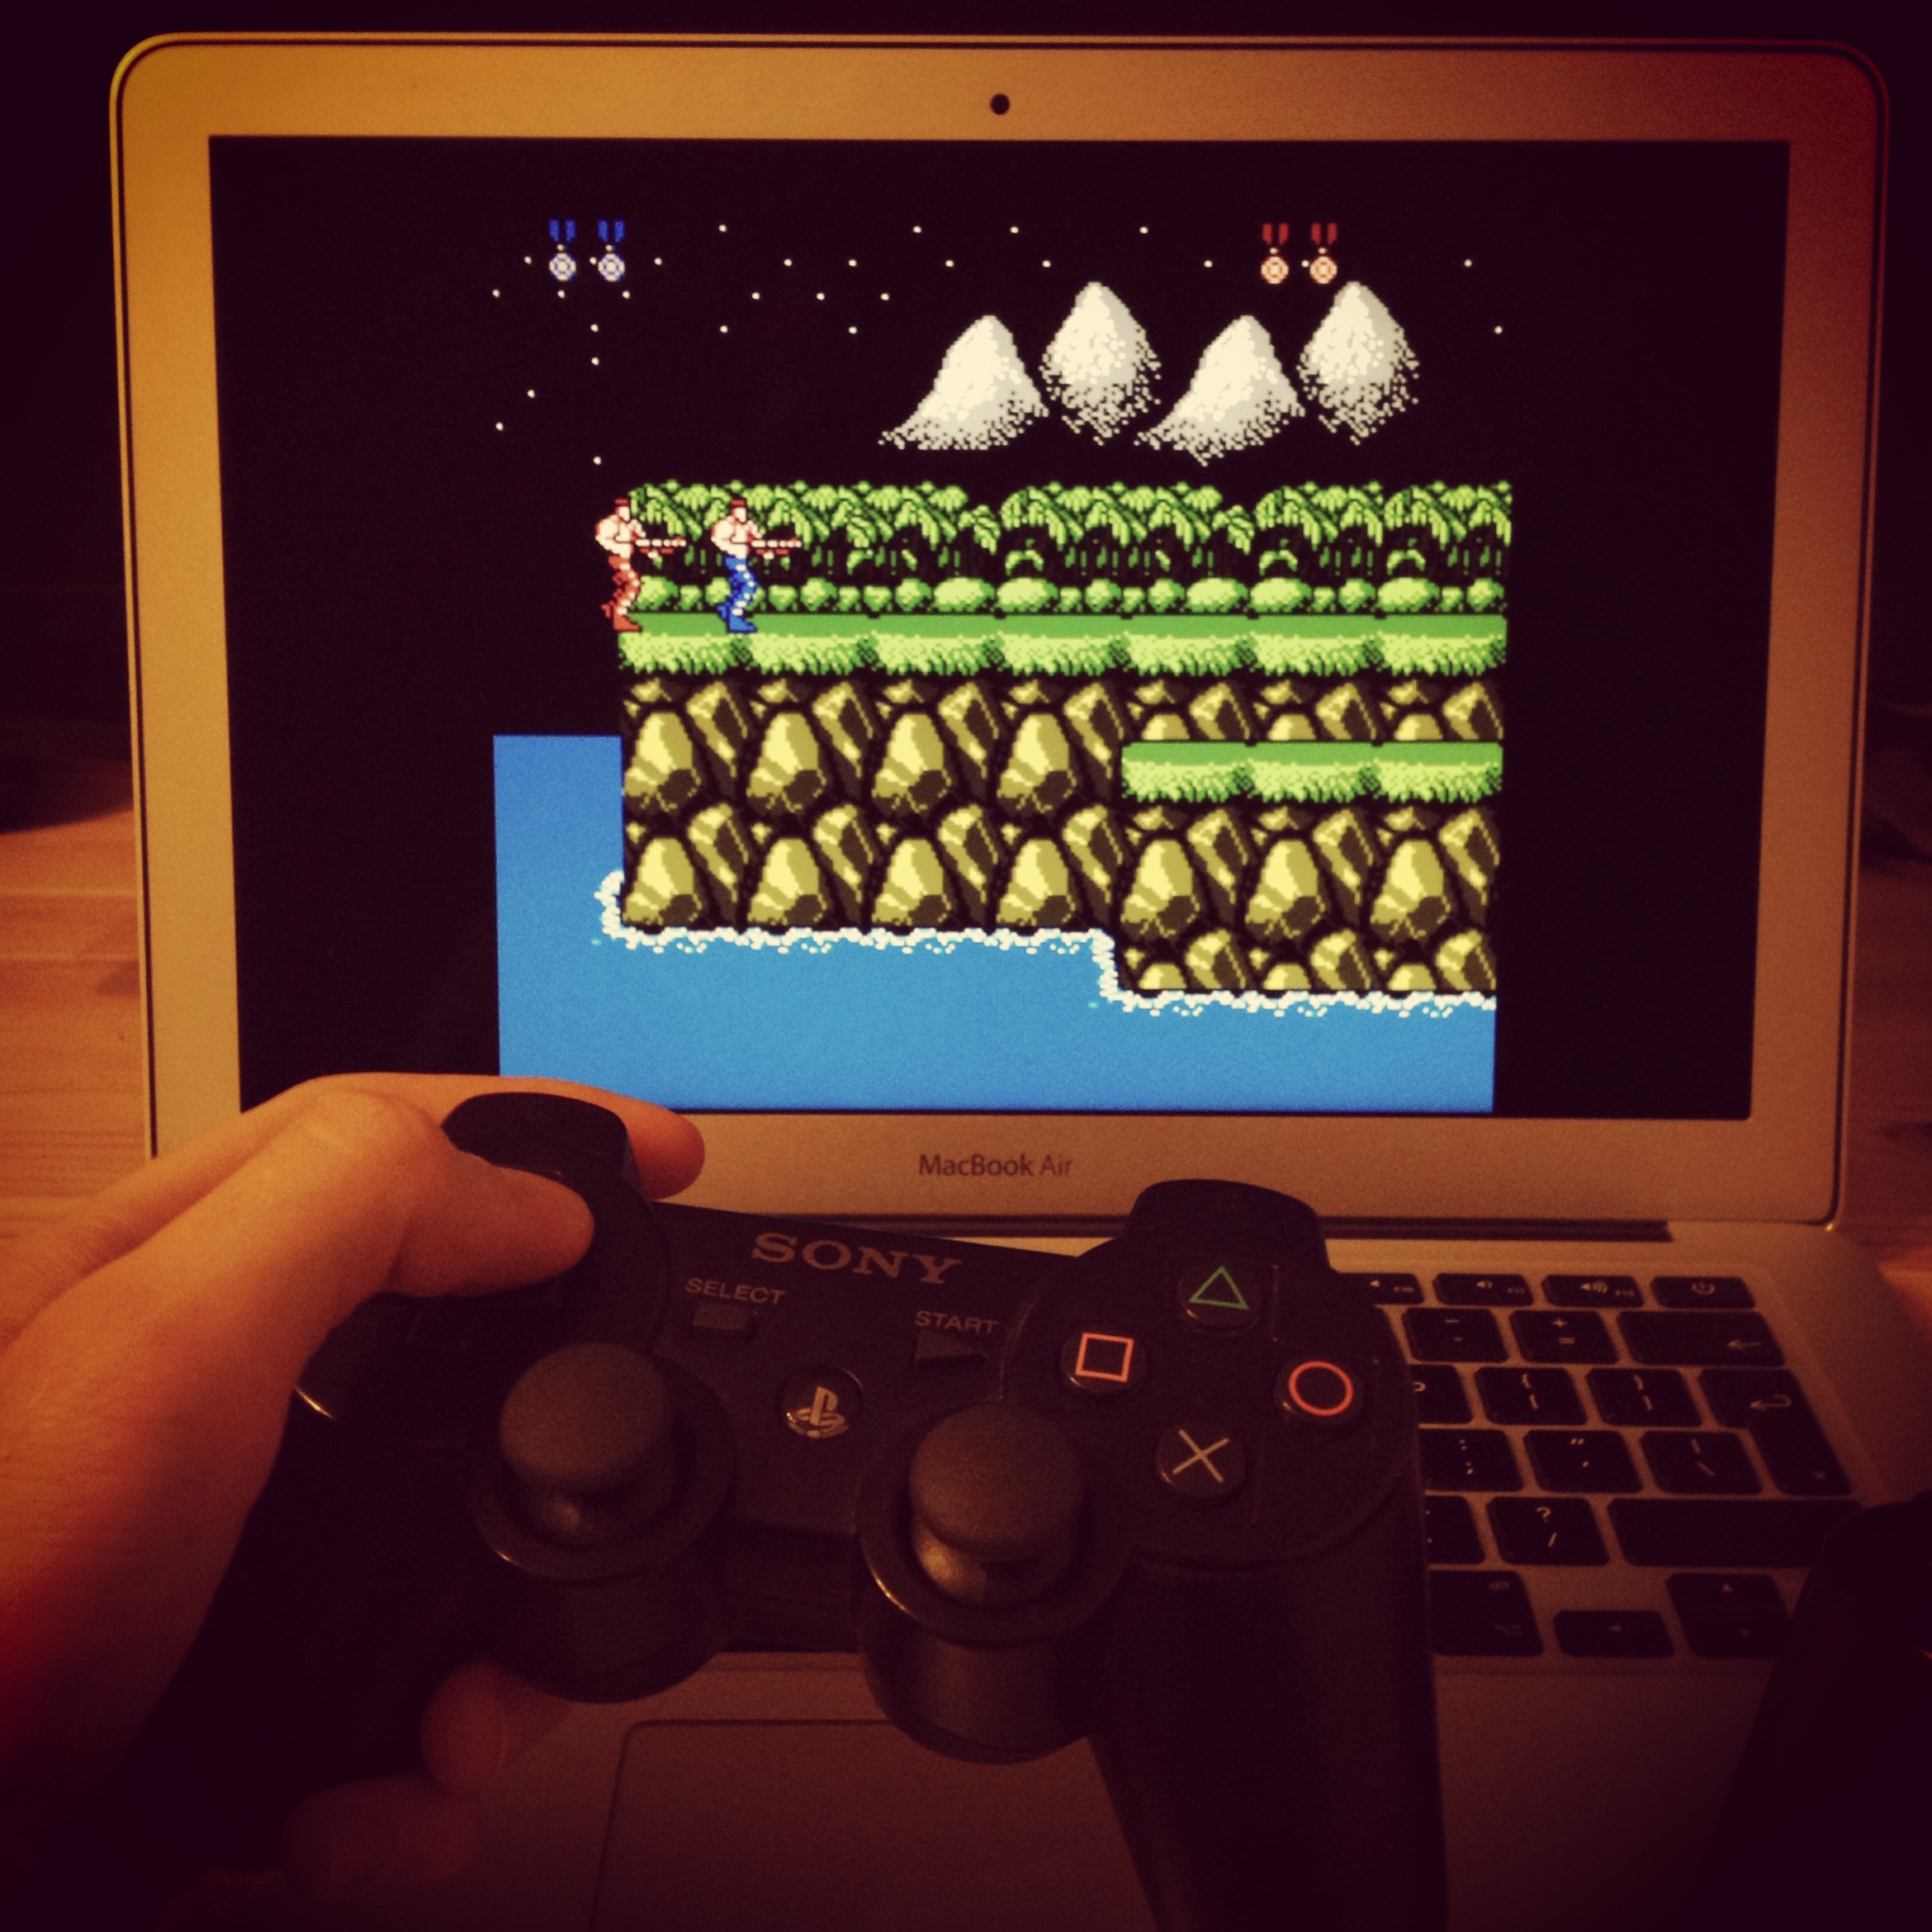 Controller Ps3 For Mac